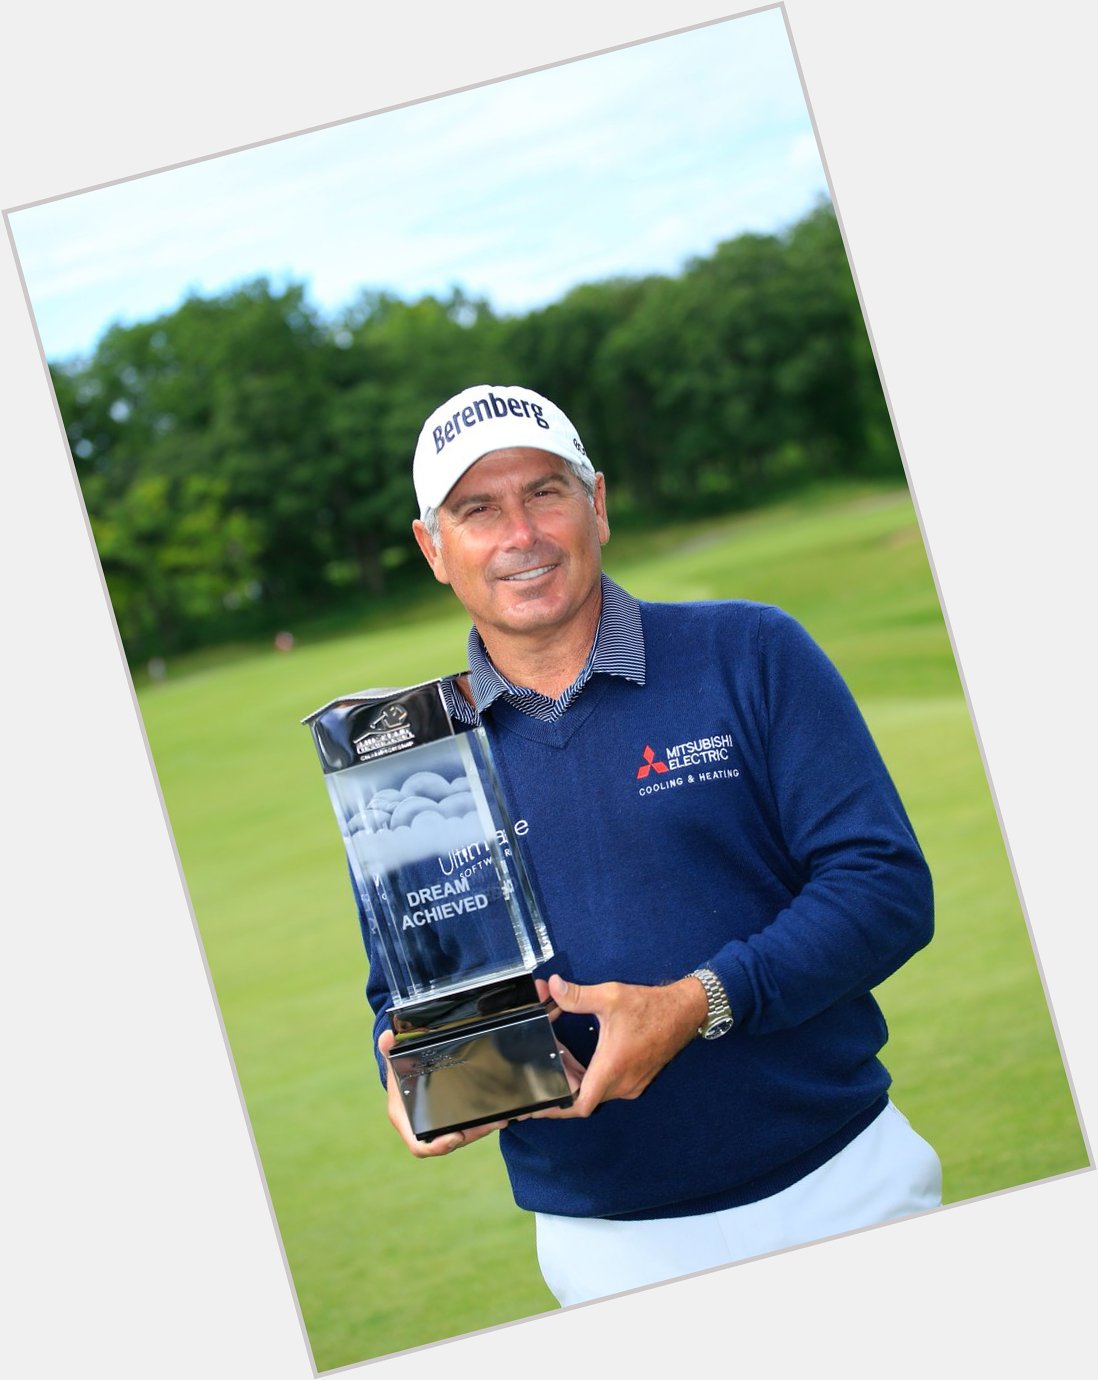  HAPPY 59th BIRTHDAY to our 2017 Champion, FRED COUPLES! Good luck this week at the 